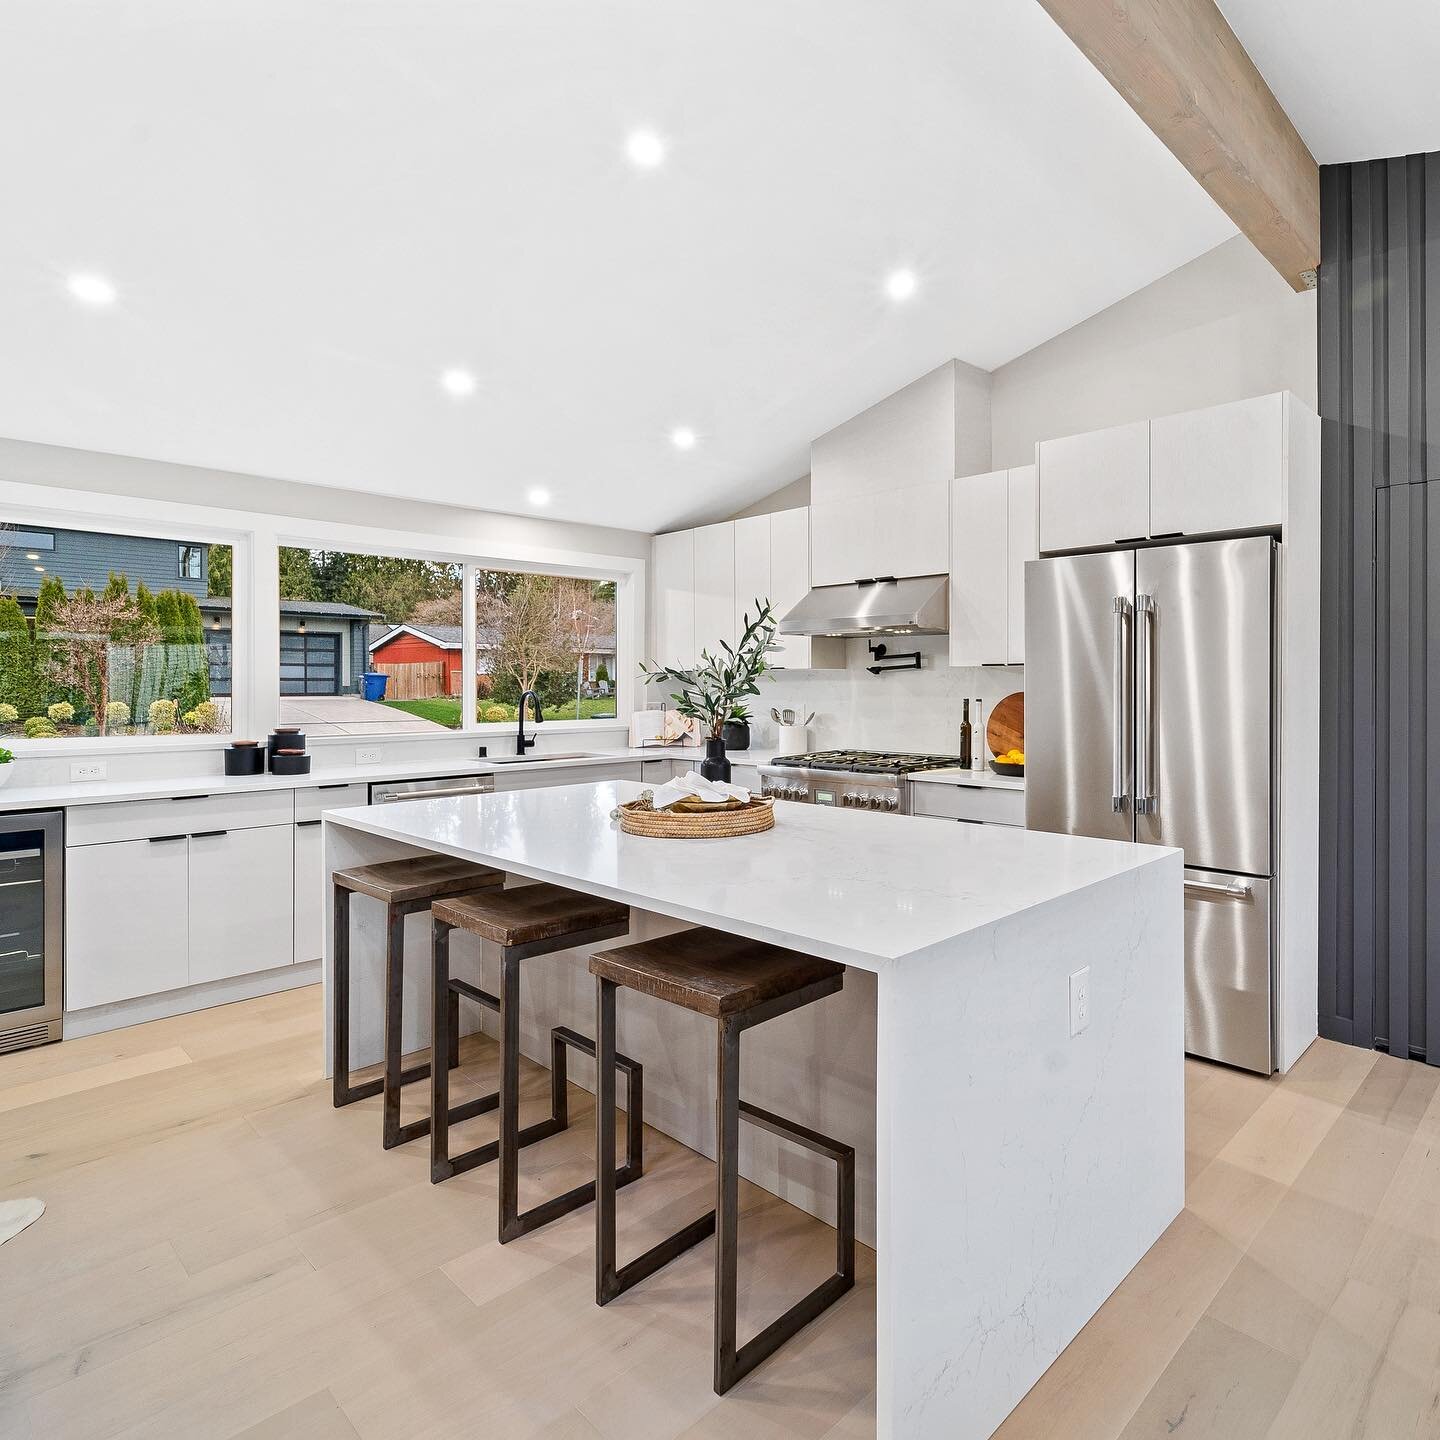 Another modern and sleek kitchen design done by @rosho808 💎✨📸

MLS#: 2198168
Listing offered by @rosho808 

#justlisted #kitchendesign #modernkitchen #seattlerealestate #bellevuewa #seattlerealestateagent #realestatephotographer